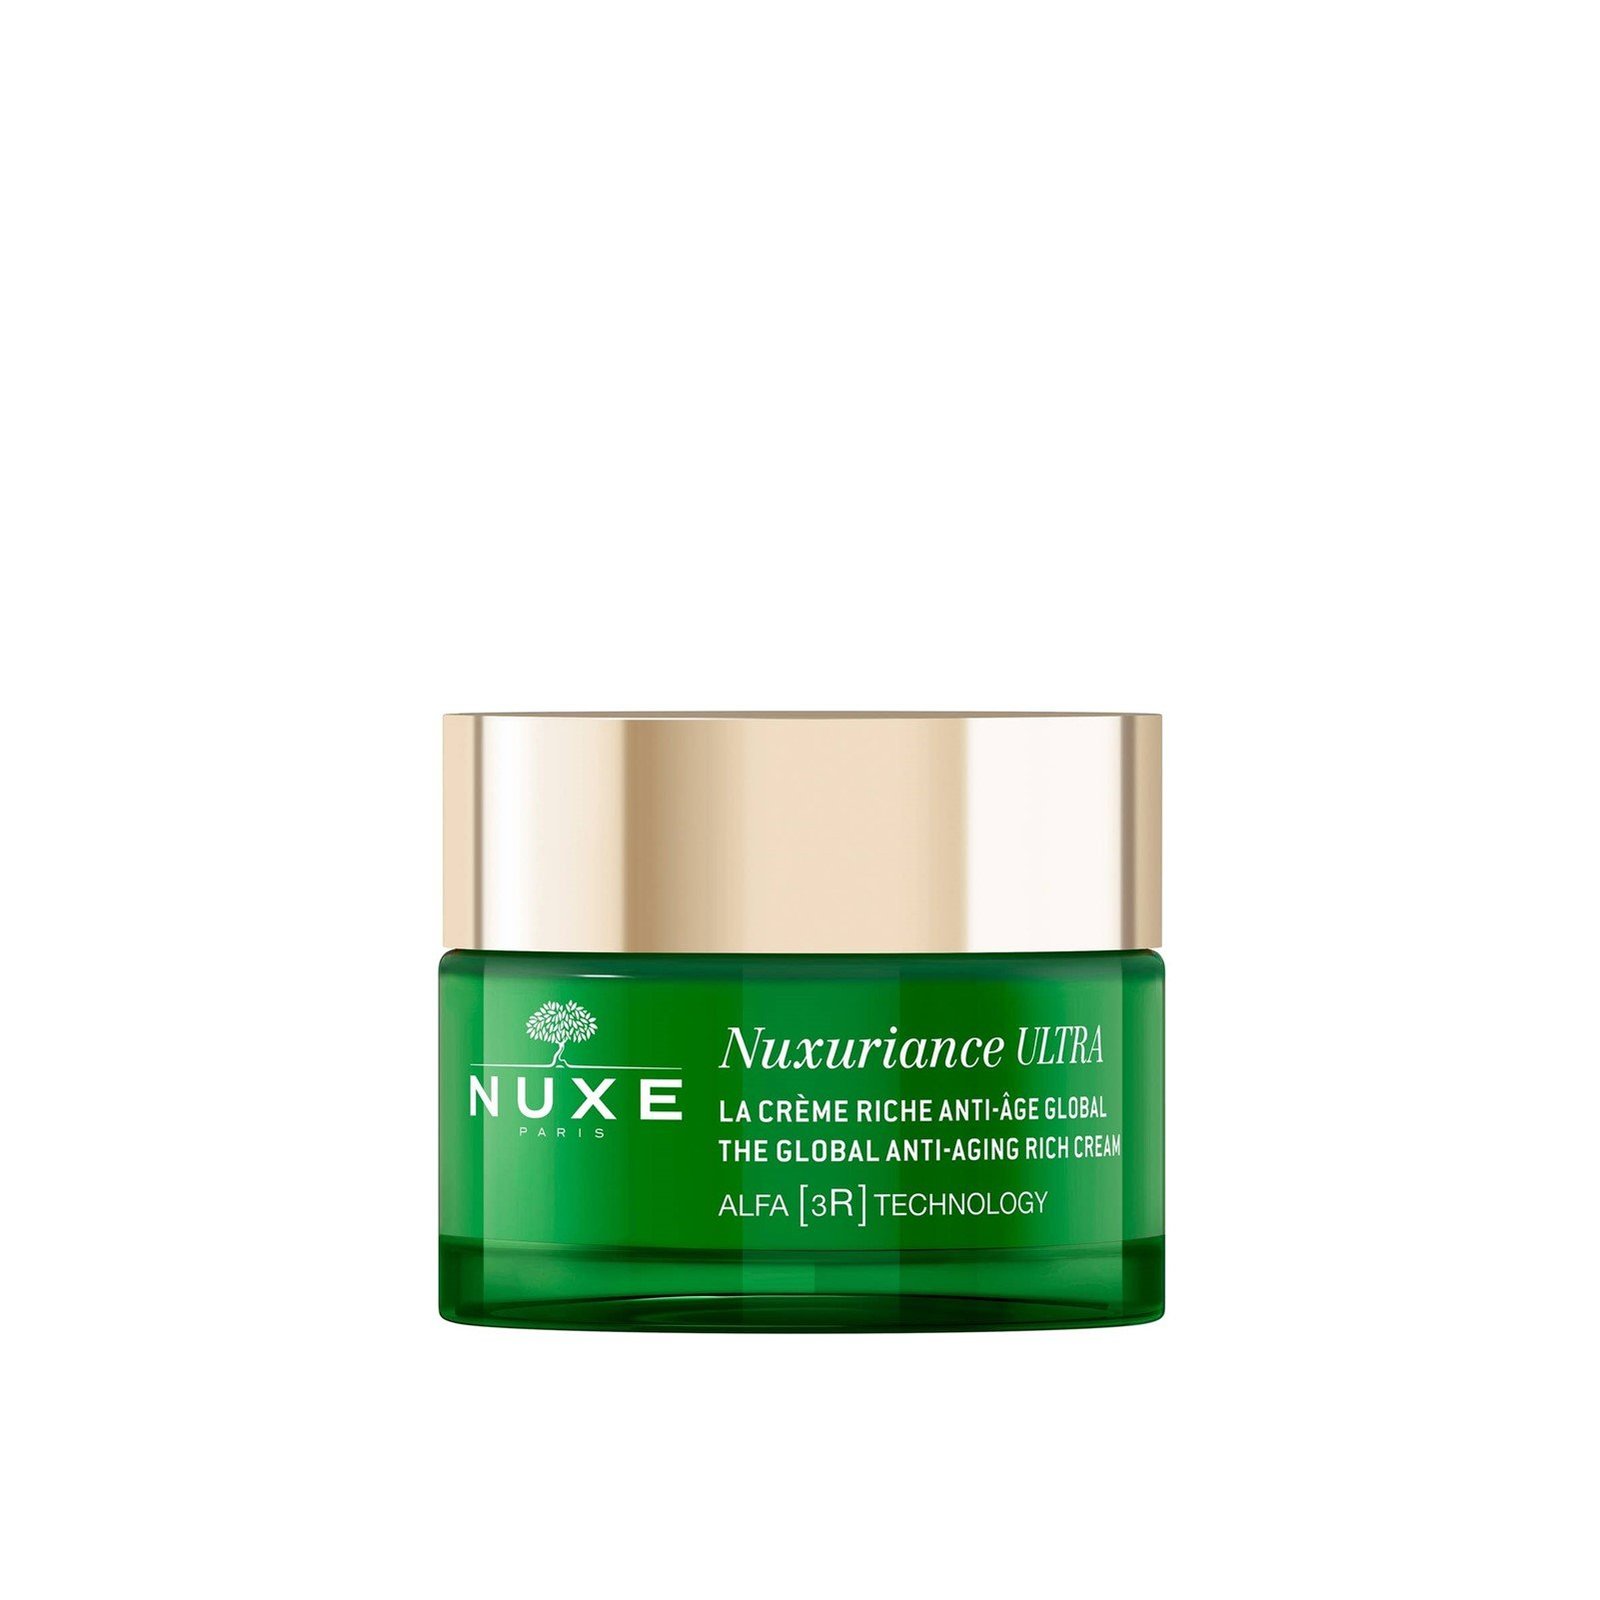 NUXE Nuxuriance Ultra The Global Anti-Aging Rich Cream 50ml (1.7floz)